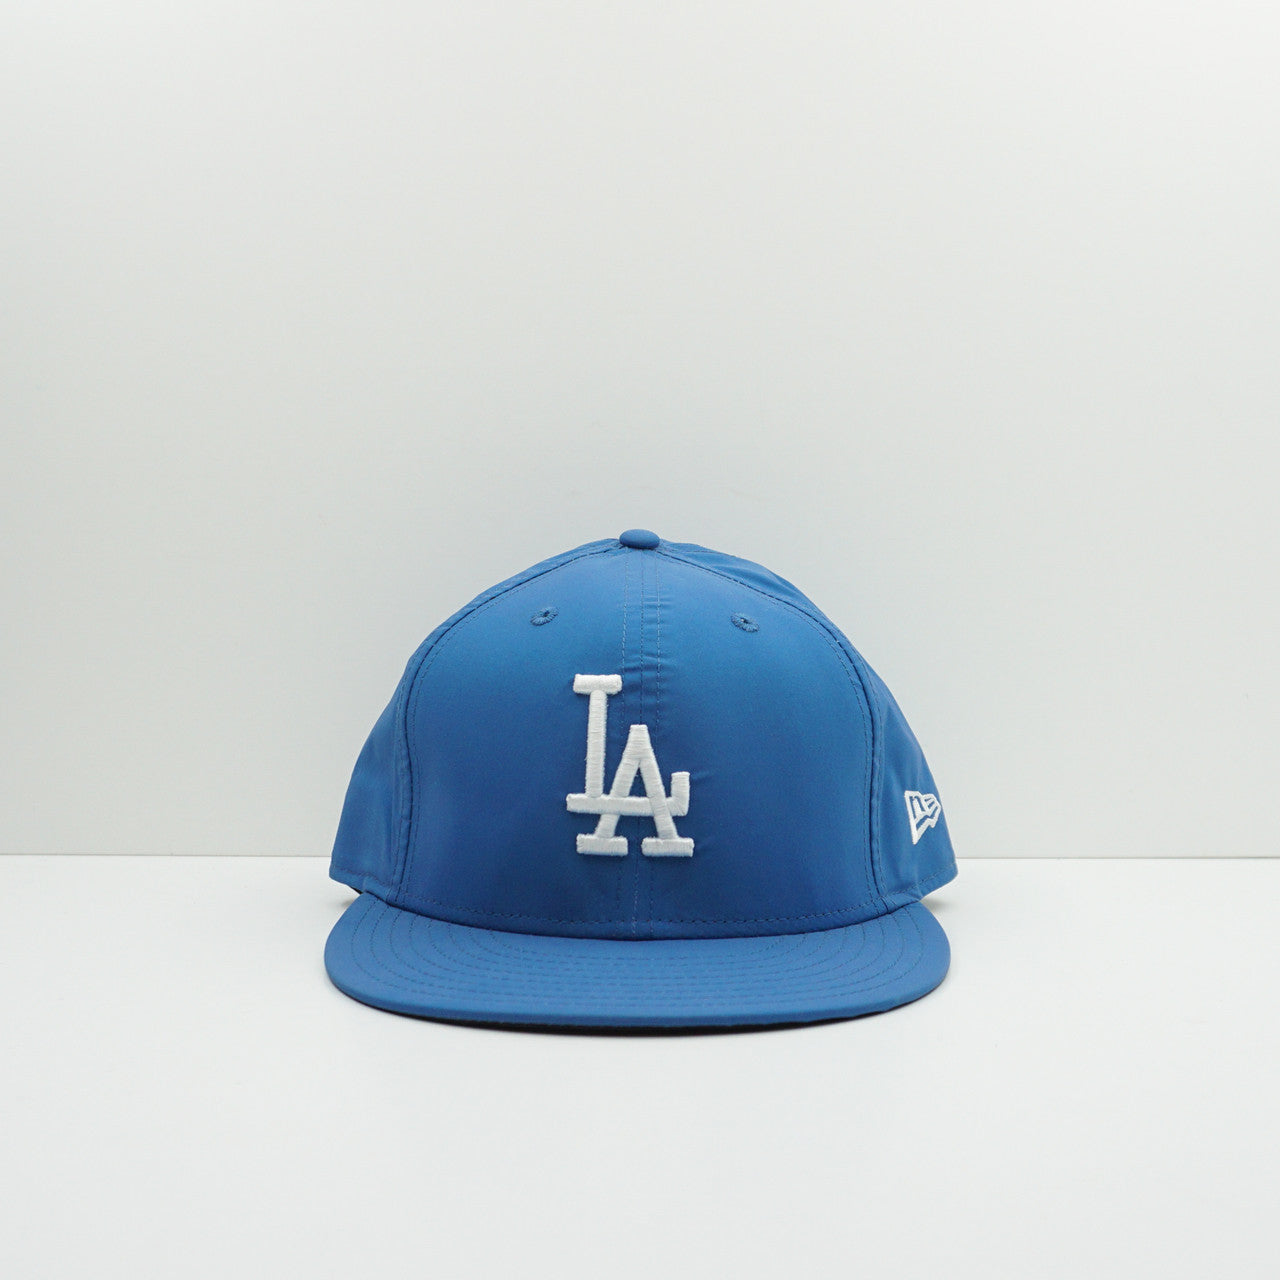 New Era Los Angeles Dodgers Blue Reflective Fitted Cap